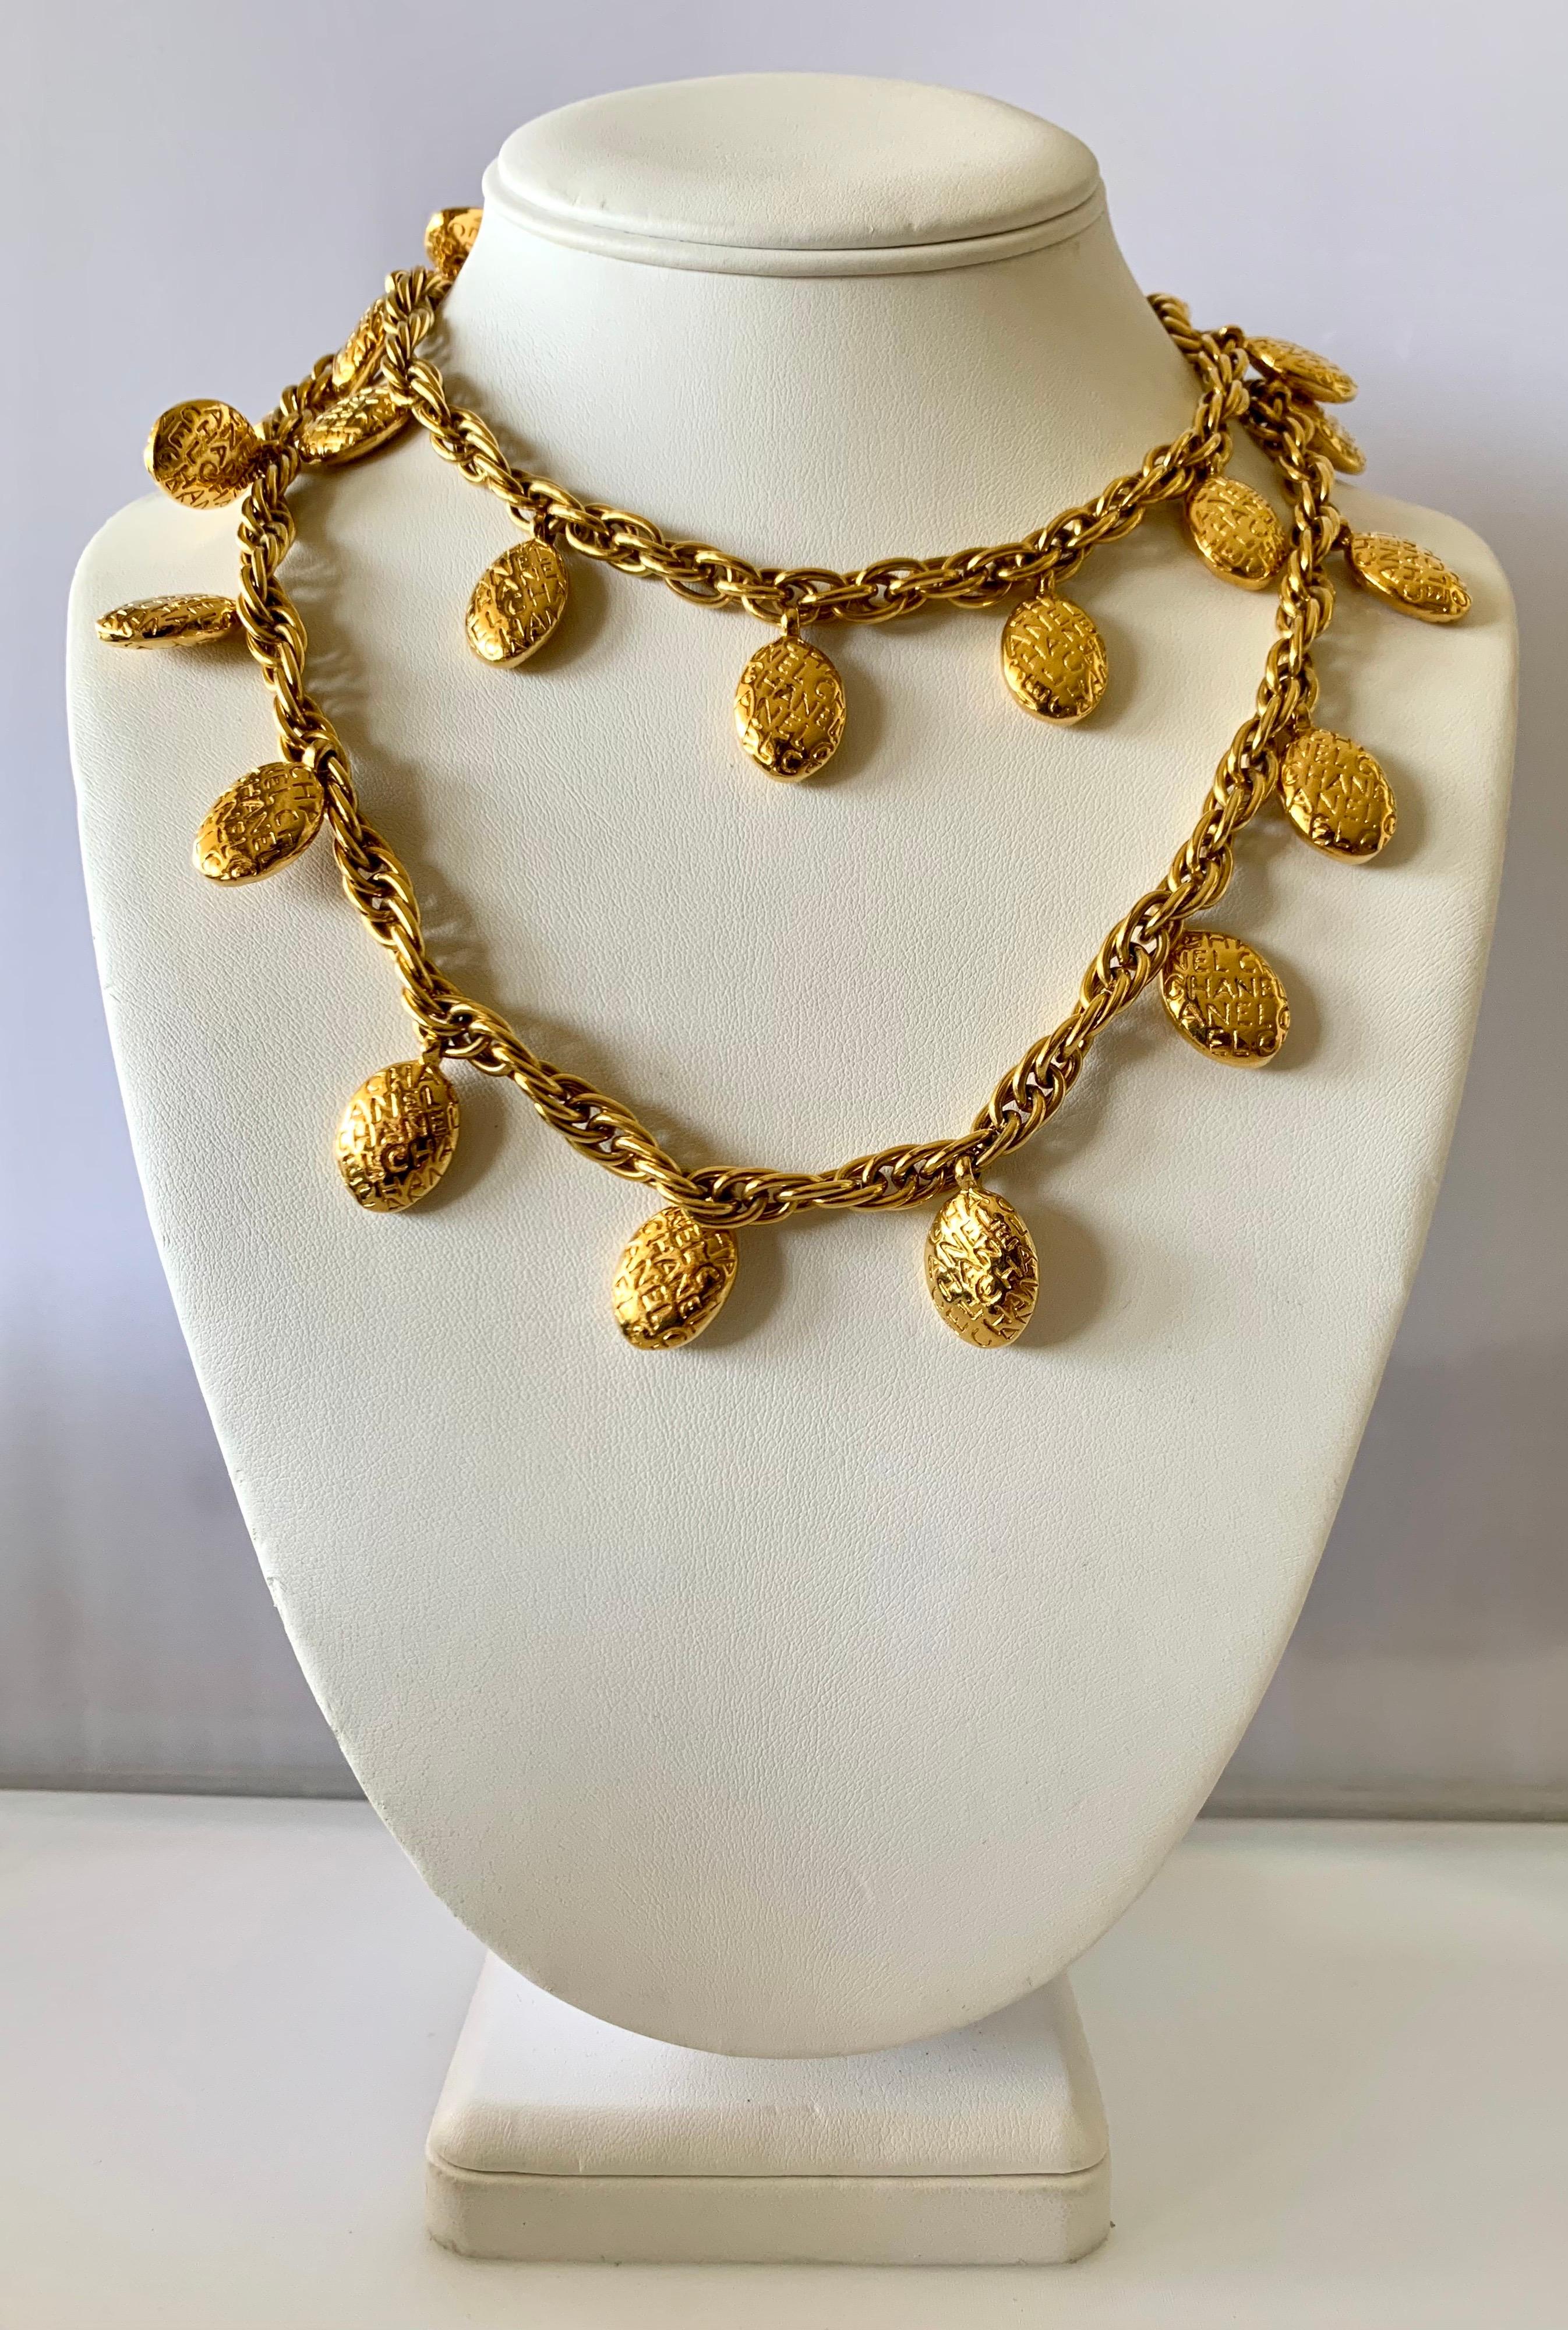 Exceptional vintage Chanel statement necklace comprised out of a thick gilt 